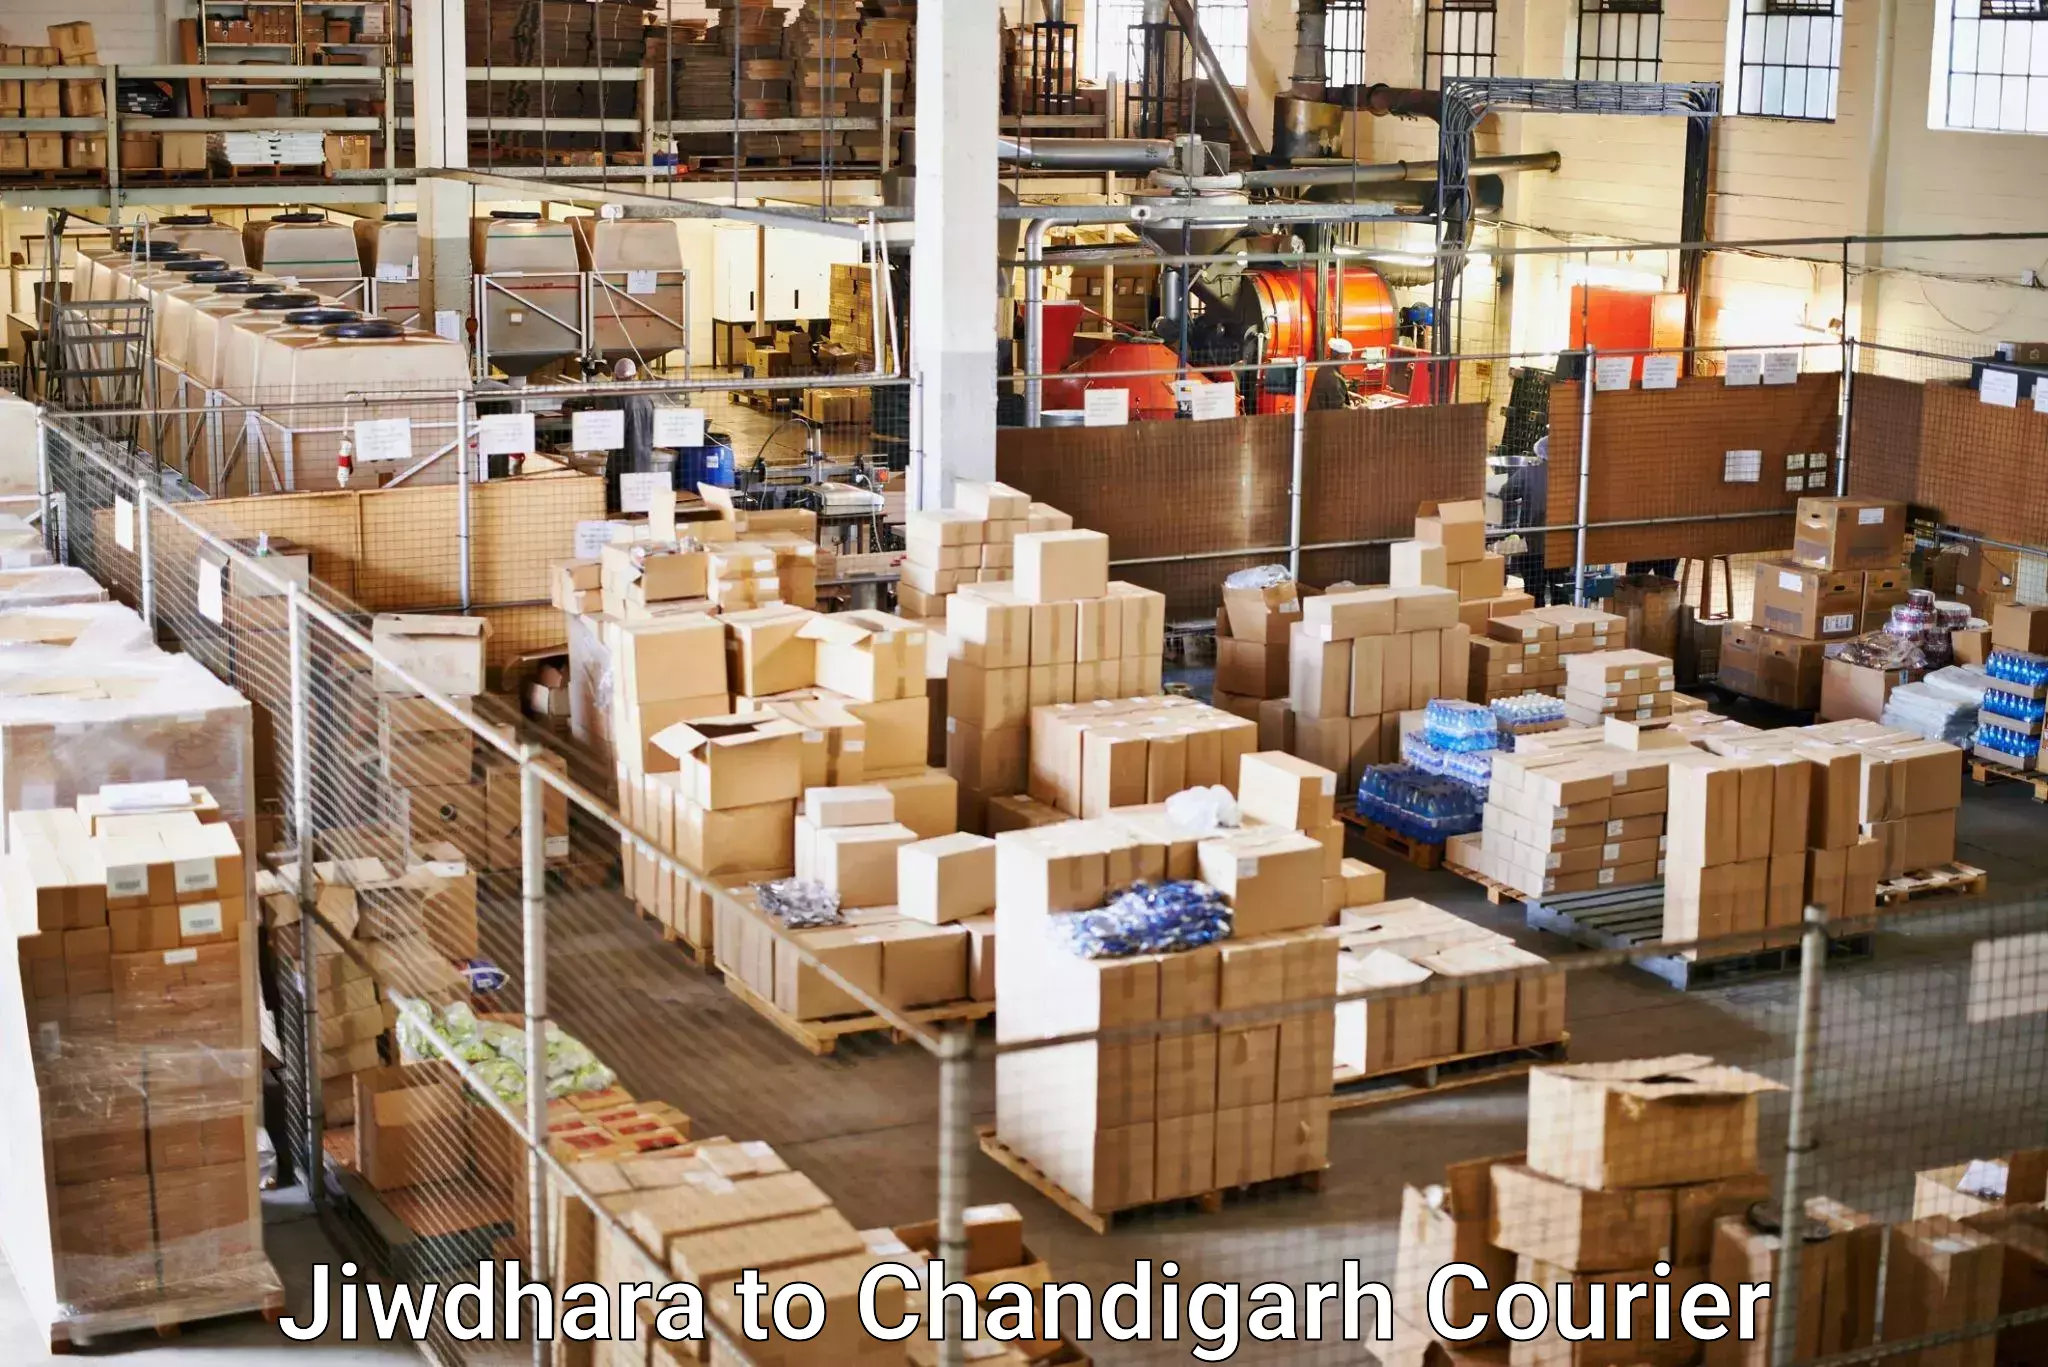 Express delivery network Jiwdhara to Chandigarh